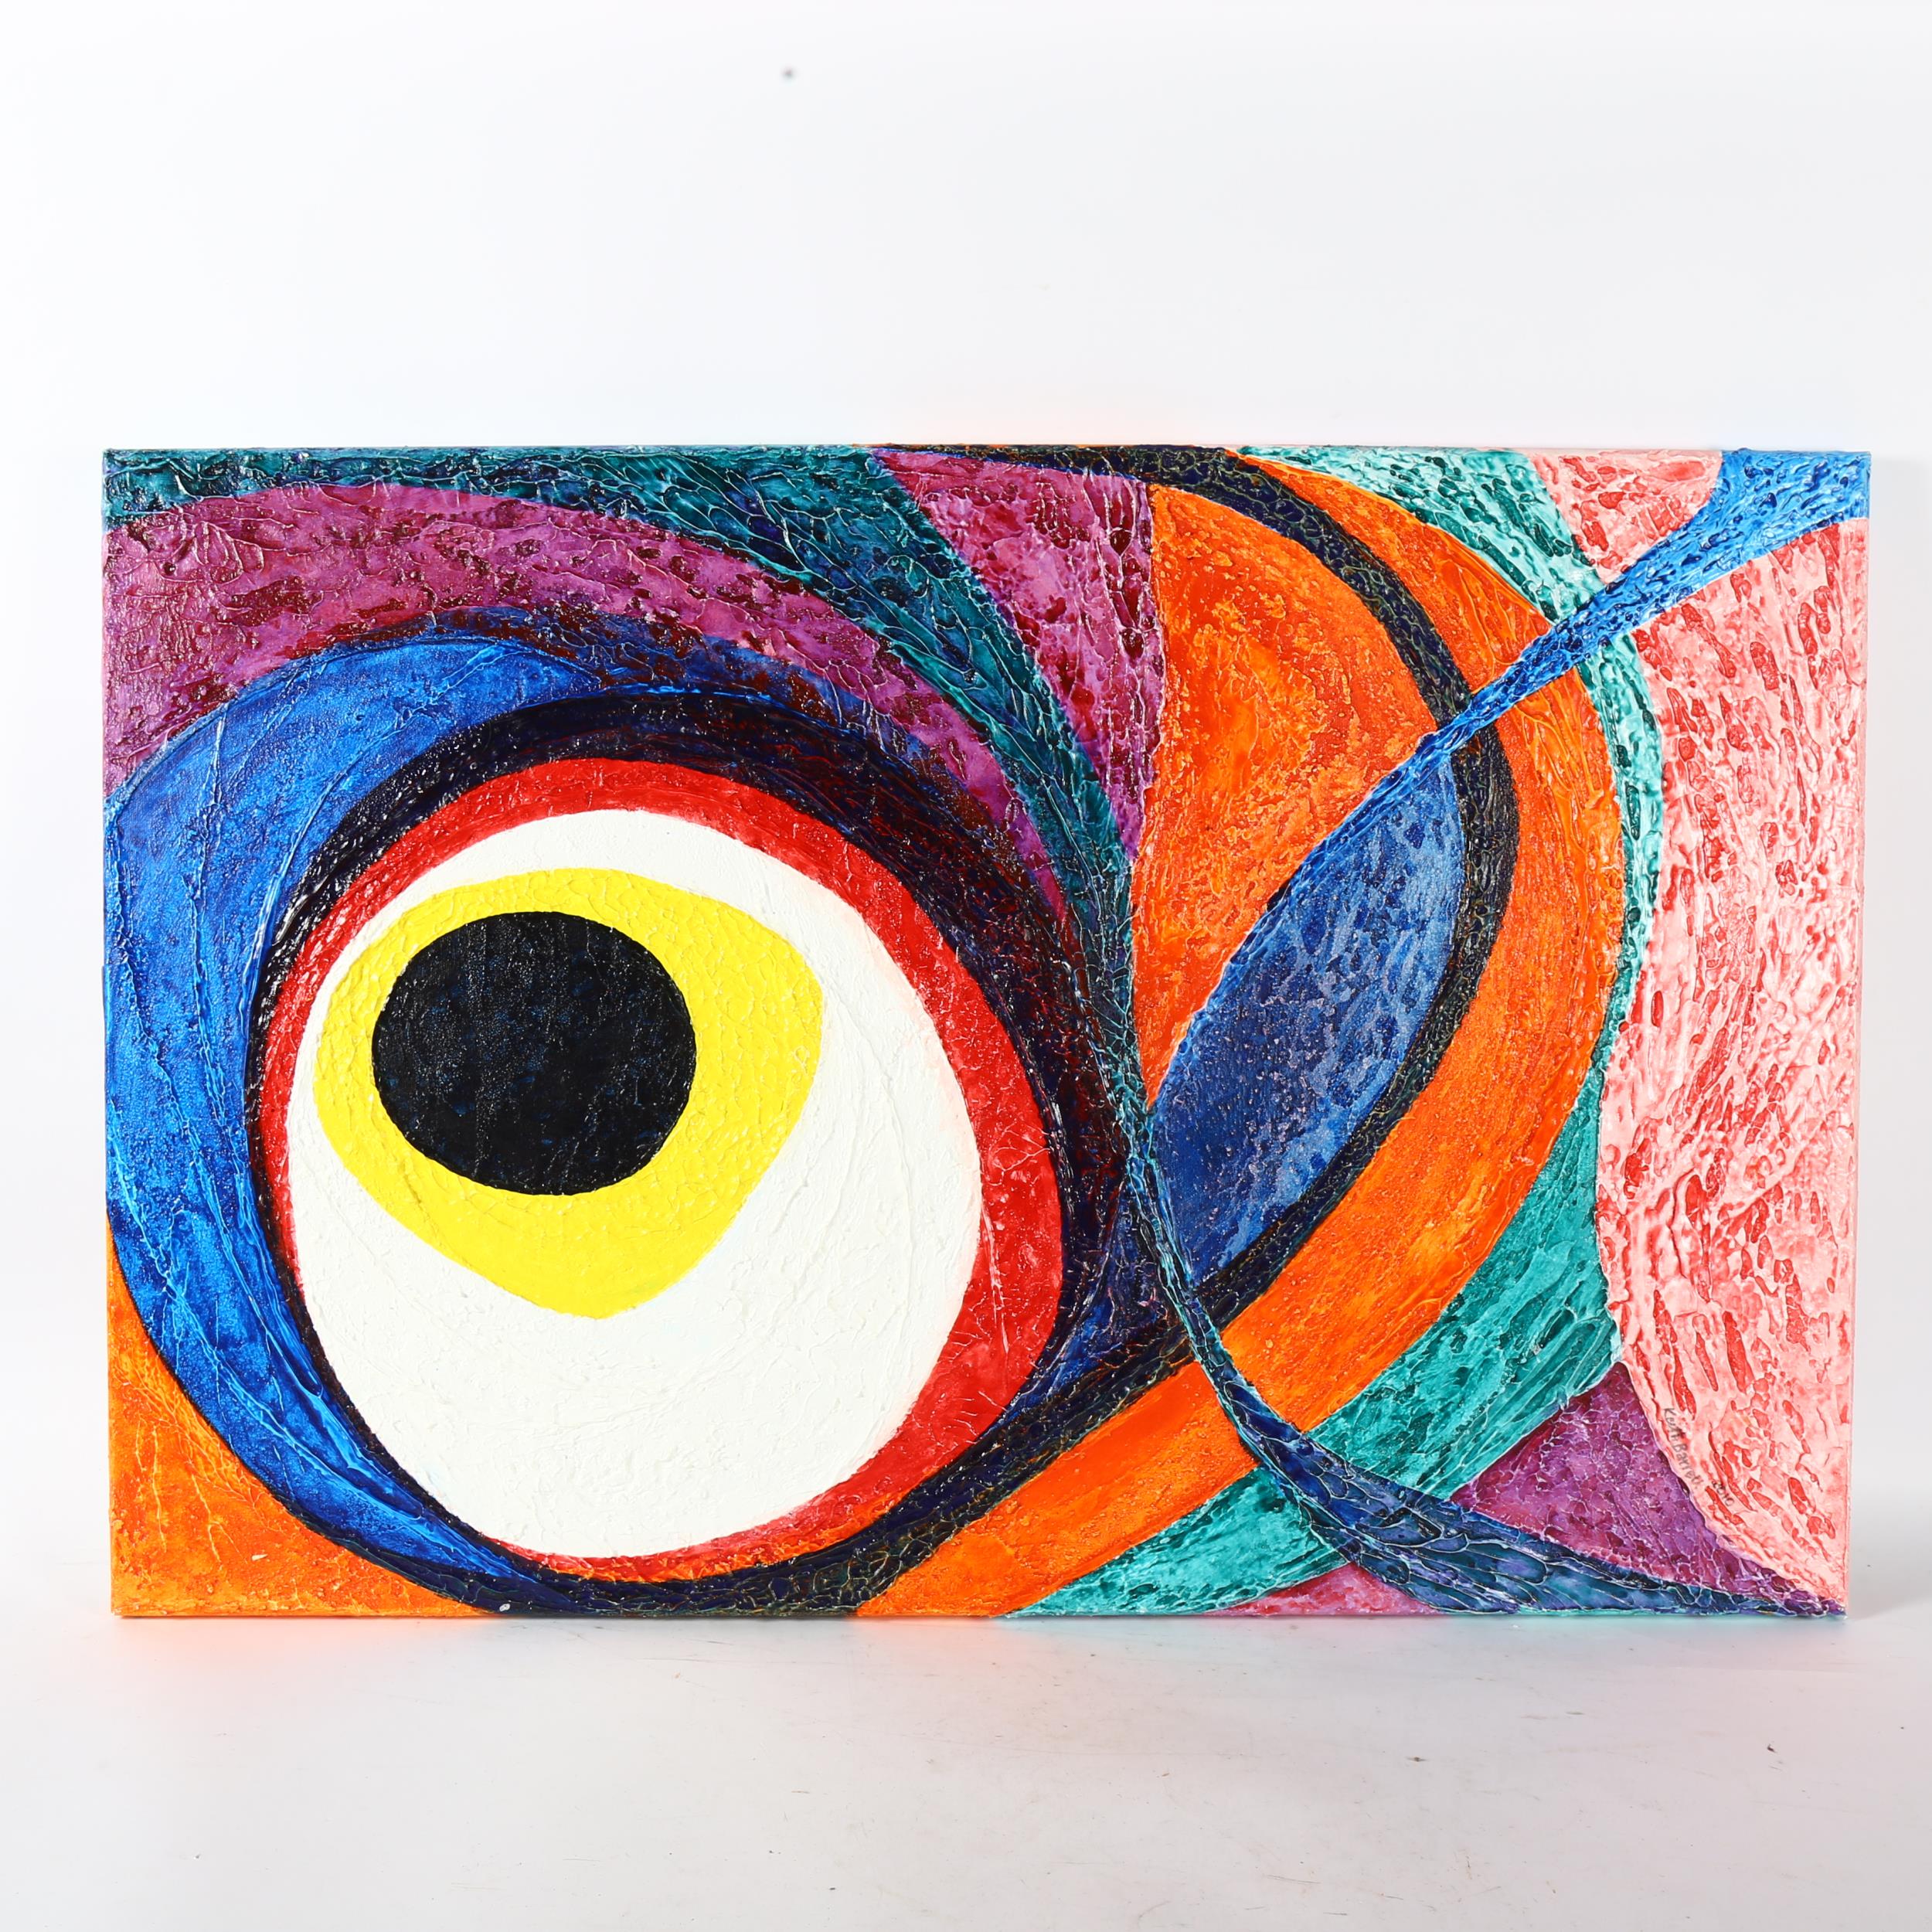 Mixed media on canvas, "concentric, overlapping, coloured arcs", 90cm x 60cm overall, unframed,